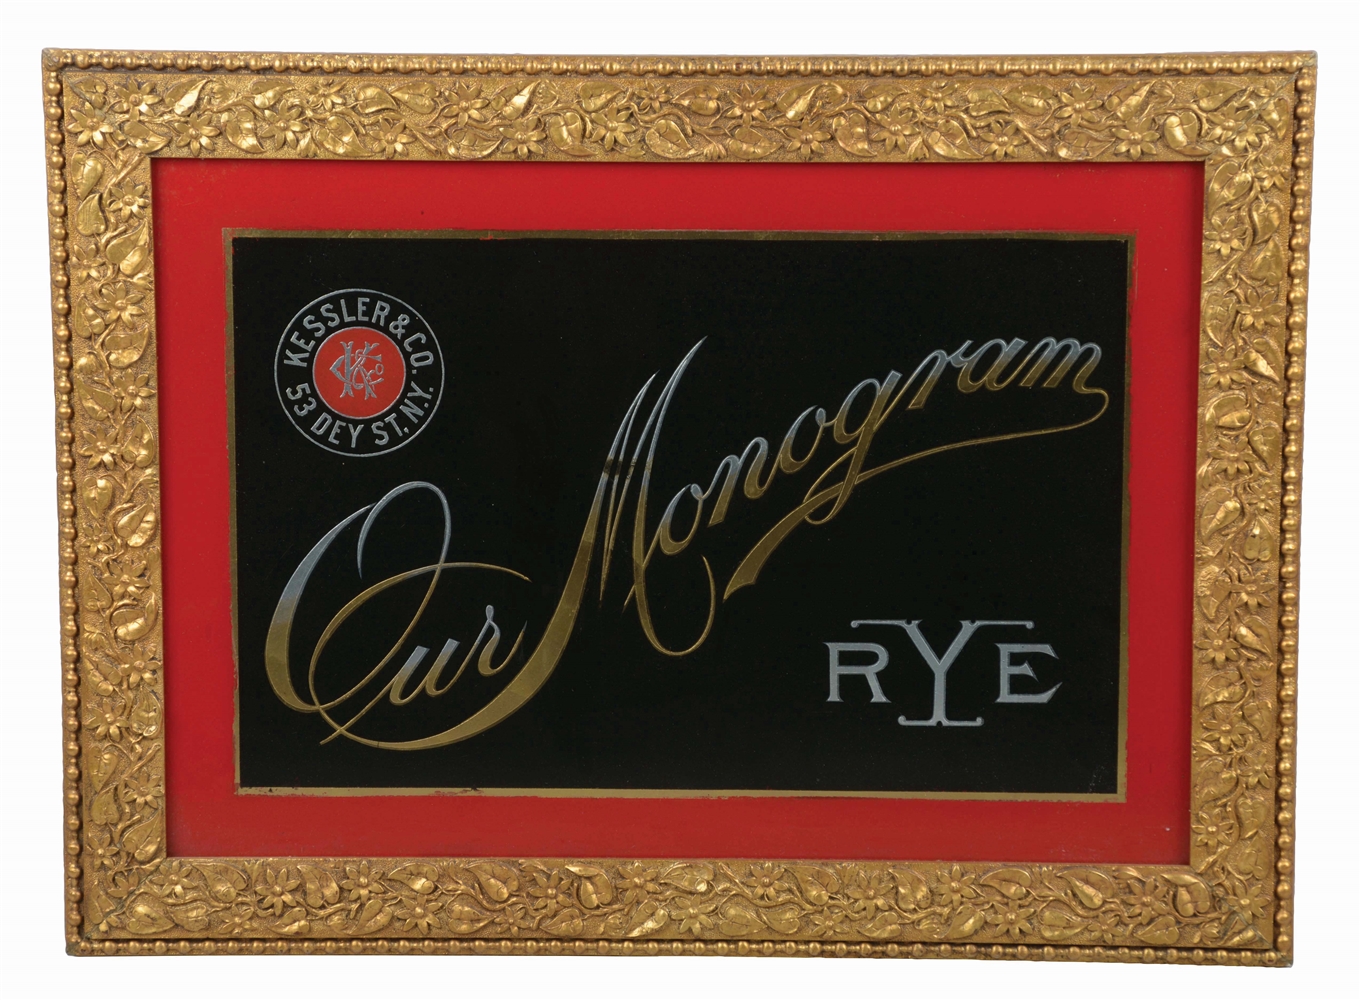 OUR MONOGRAM RYE REVERSE GLASS ADVERTISING SIGN.